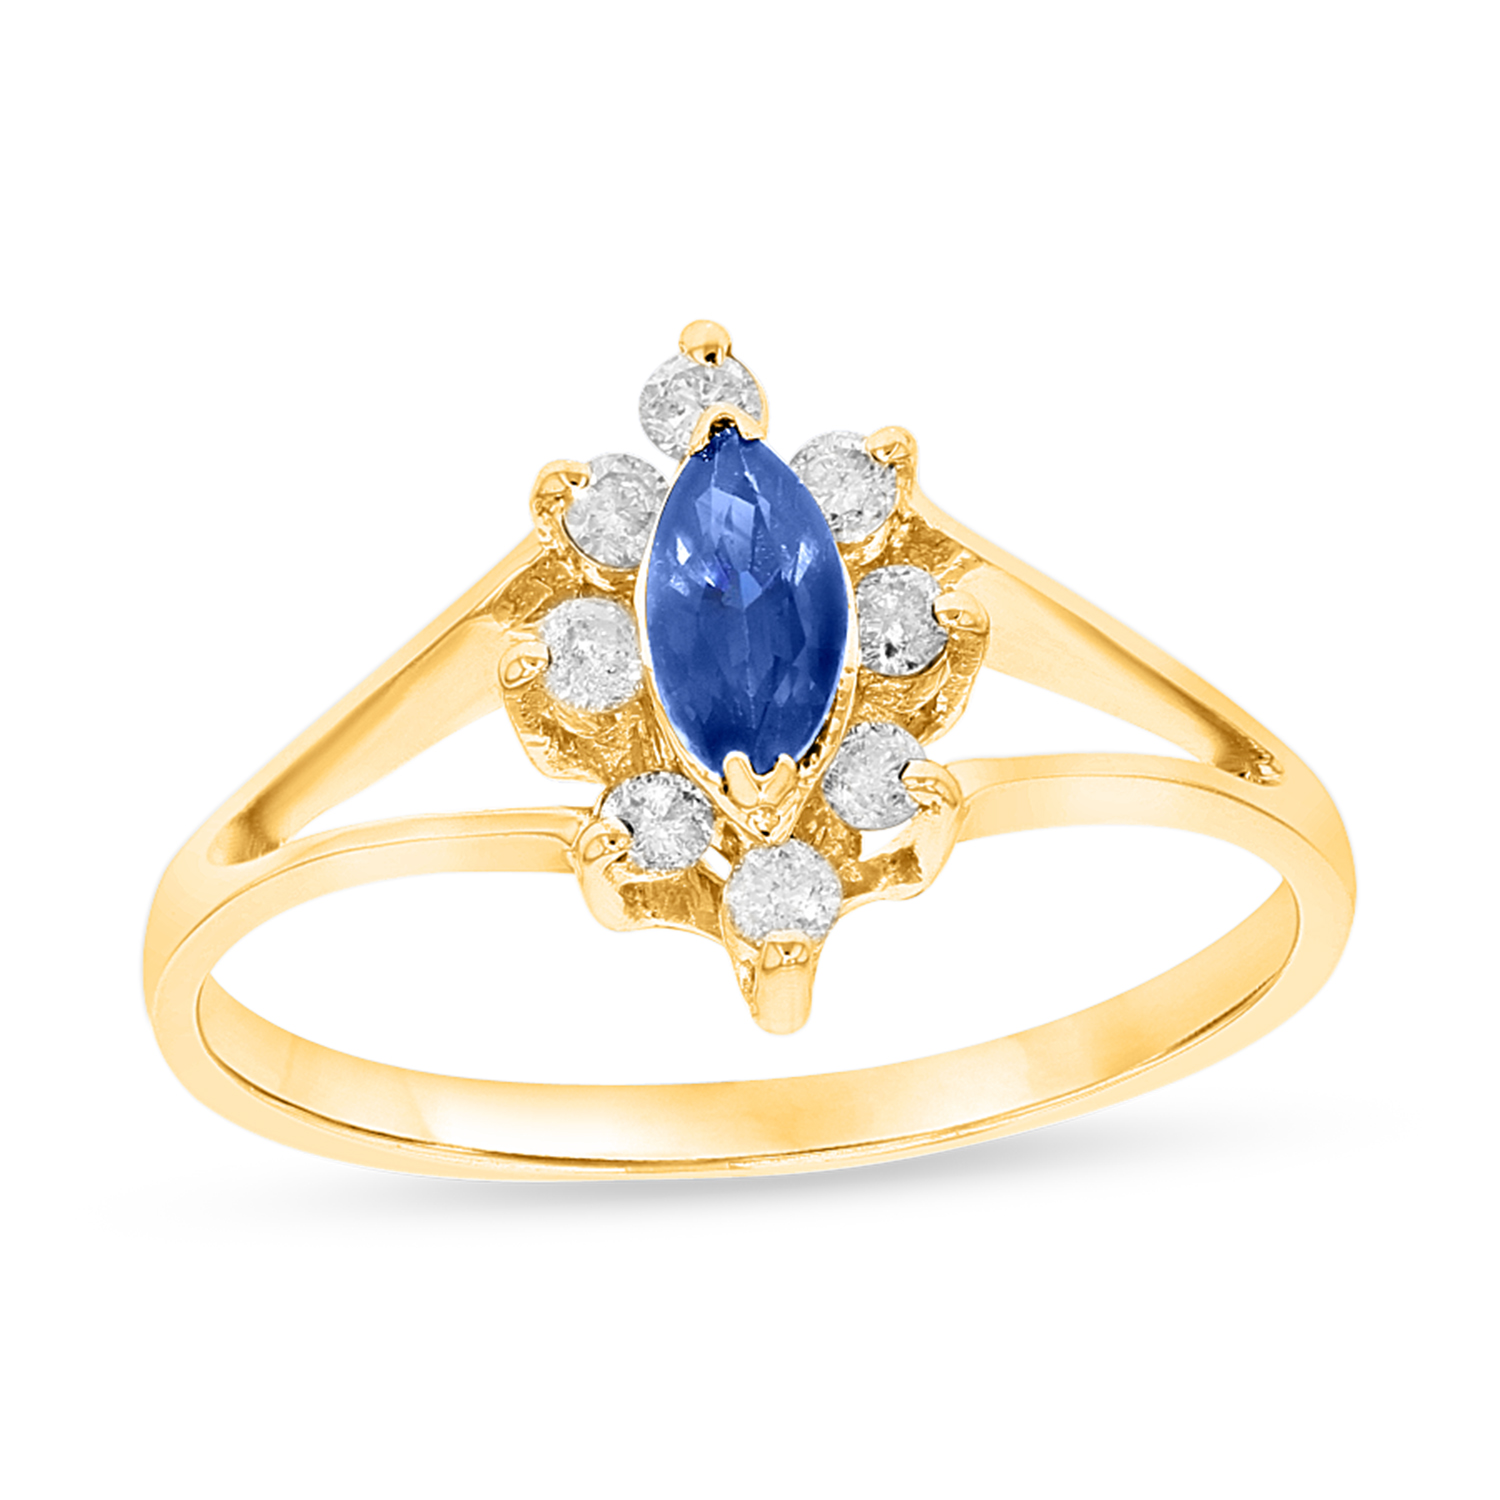 0.40ctw Diamond and Sapphire Marquis Ring in 14k Yellow Gold